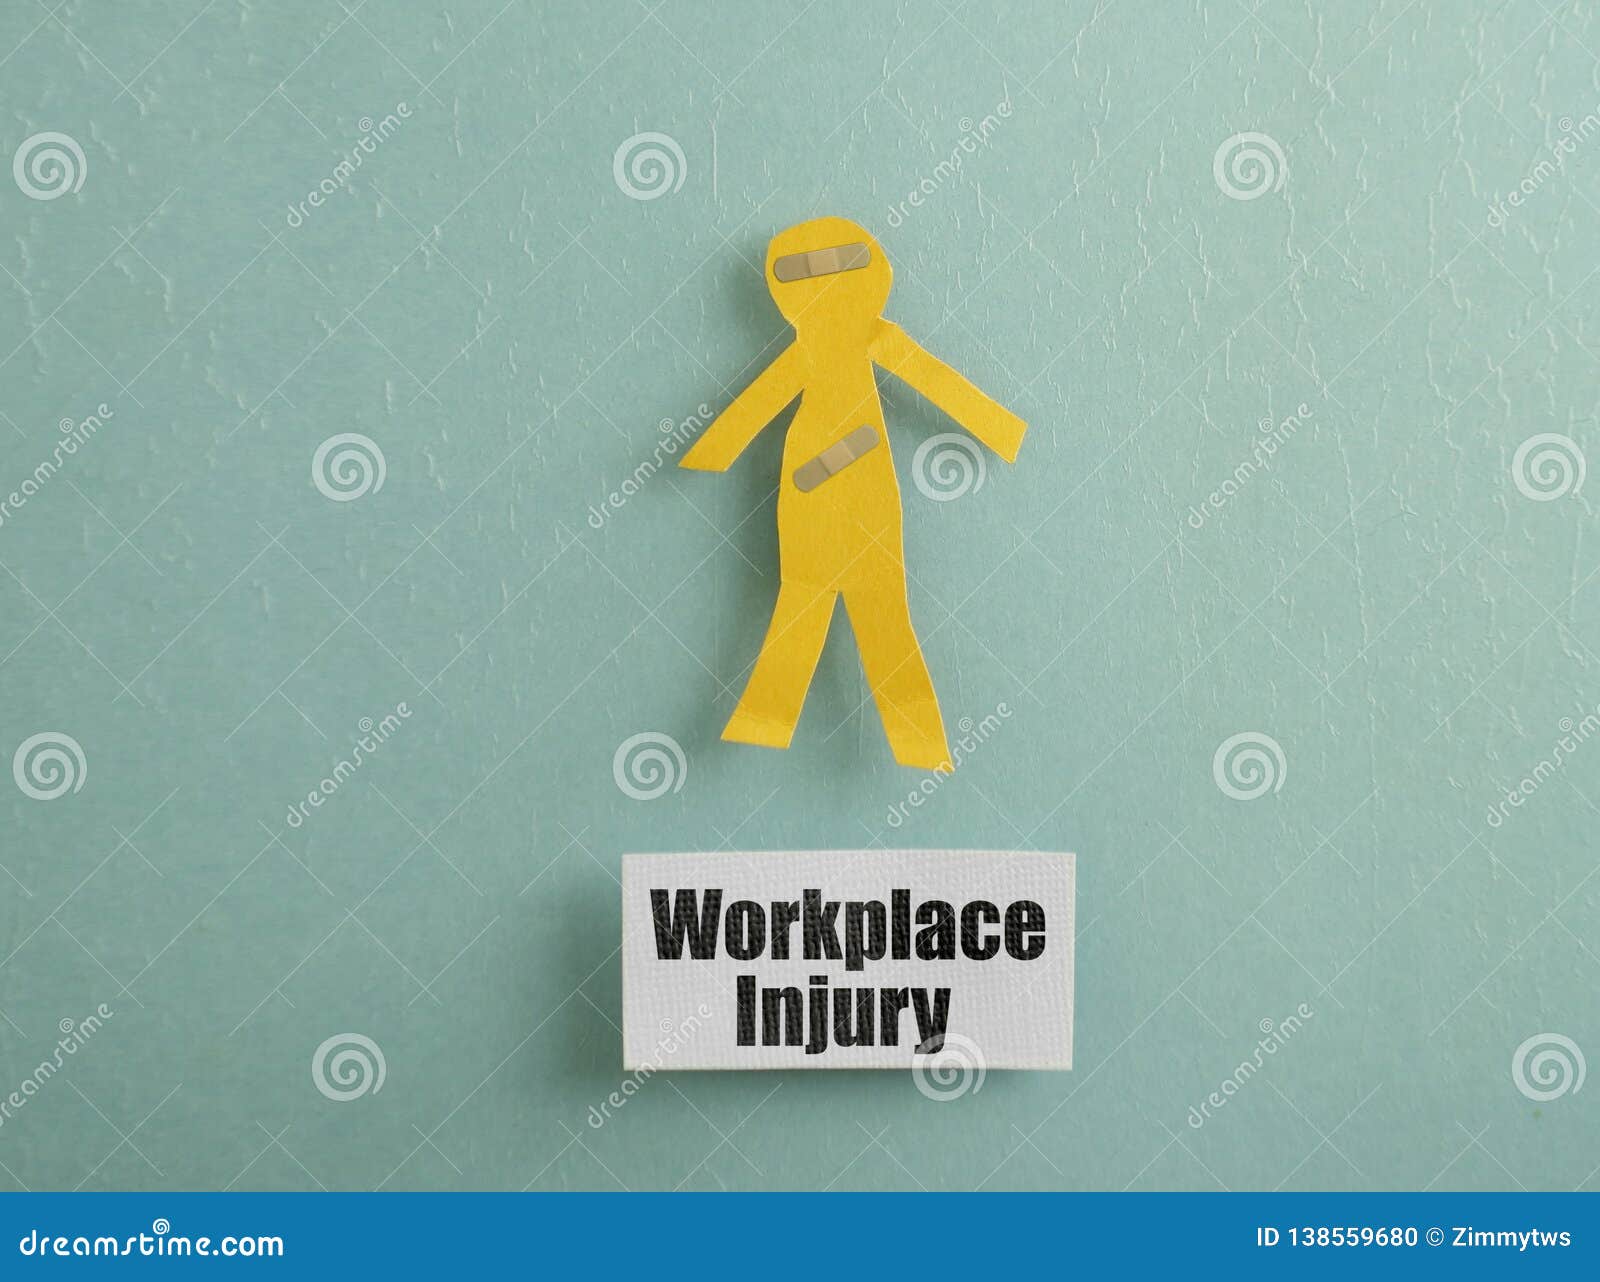 workplace injury worker concept